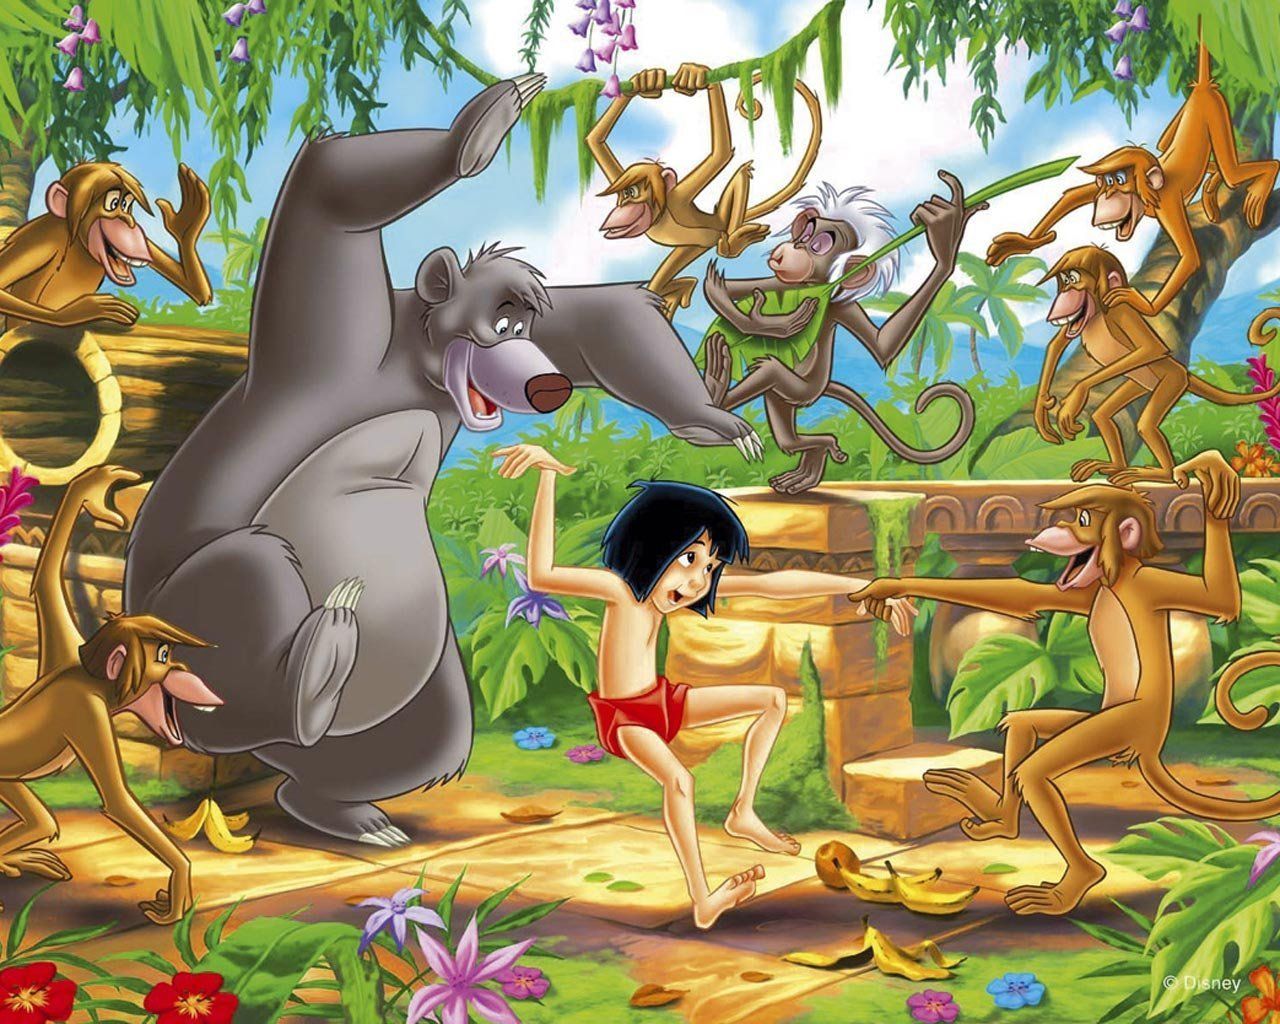 Of Disney the Jungle Book HD Wallpaper for iPhone